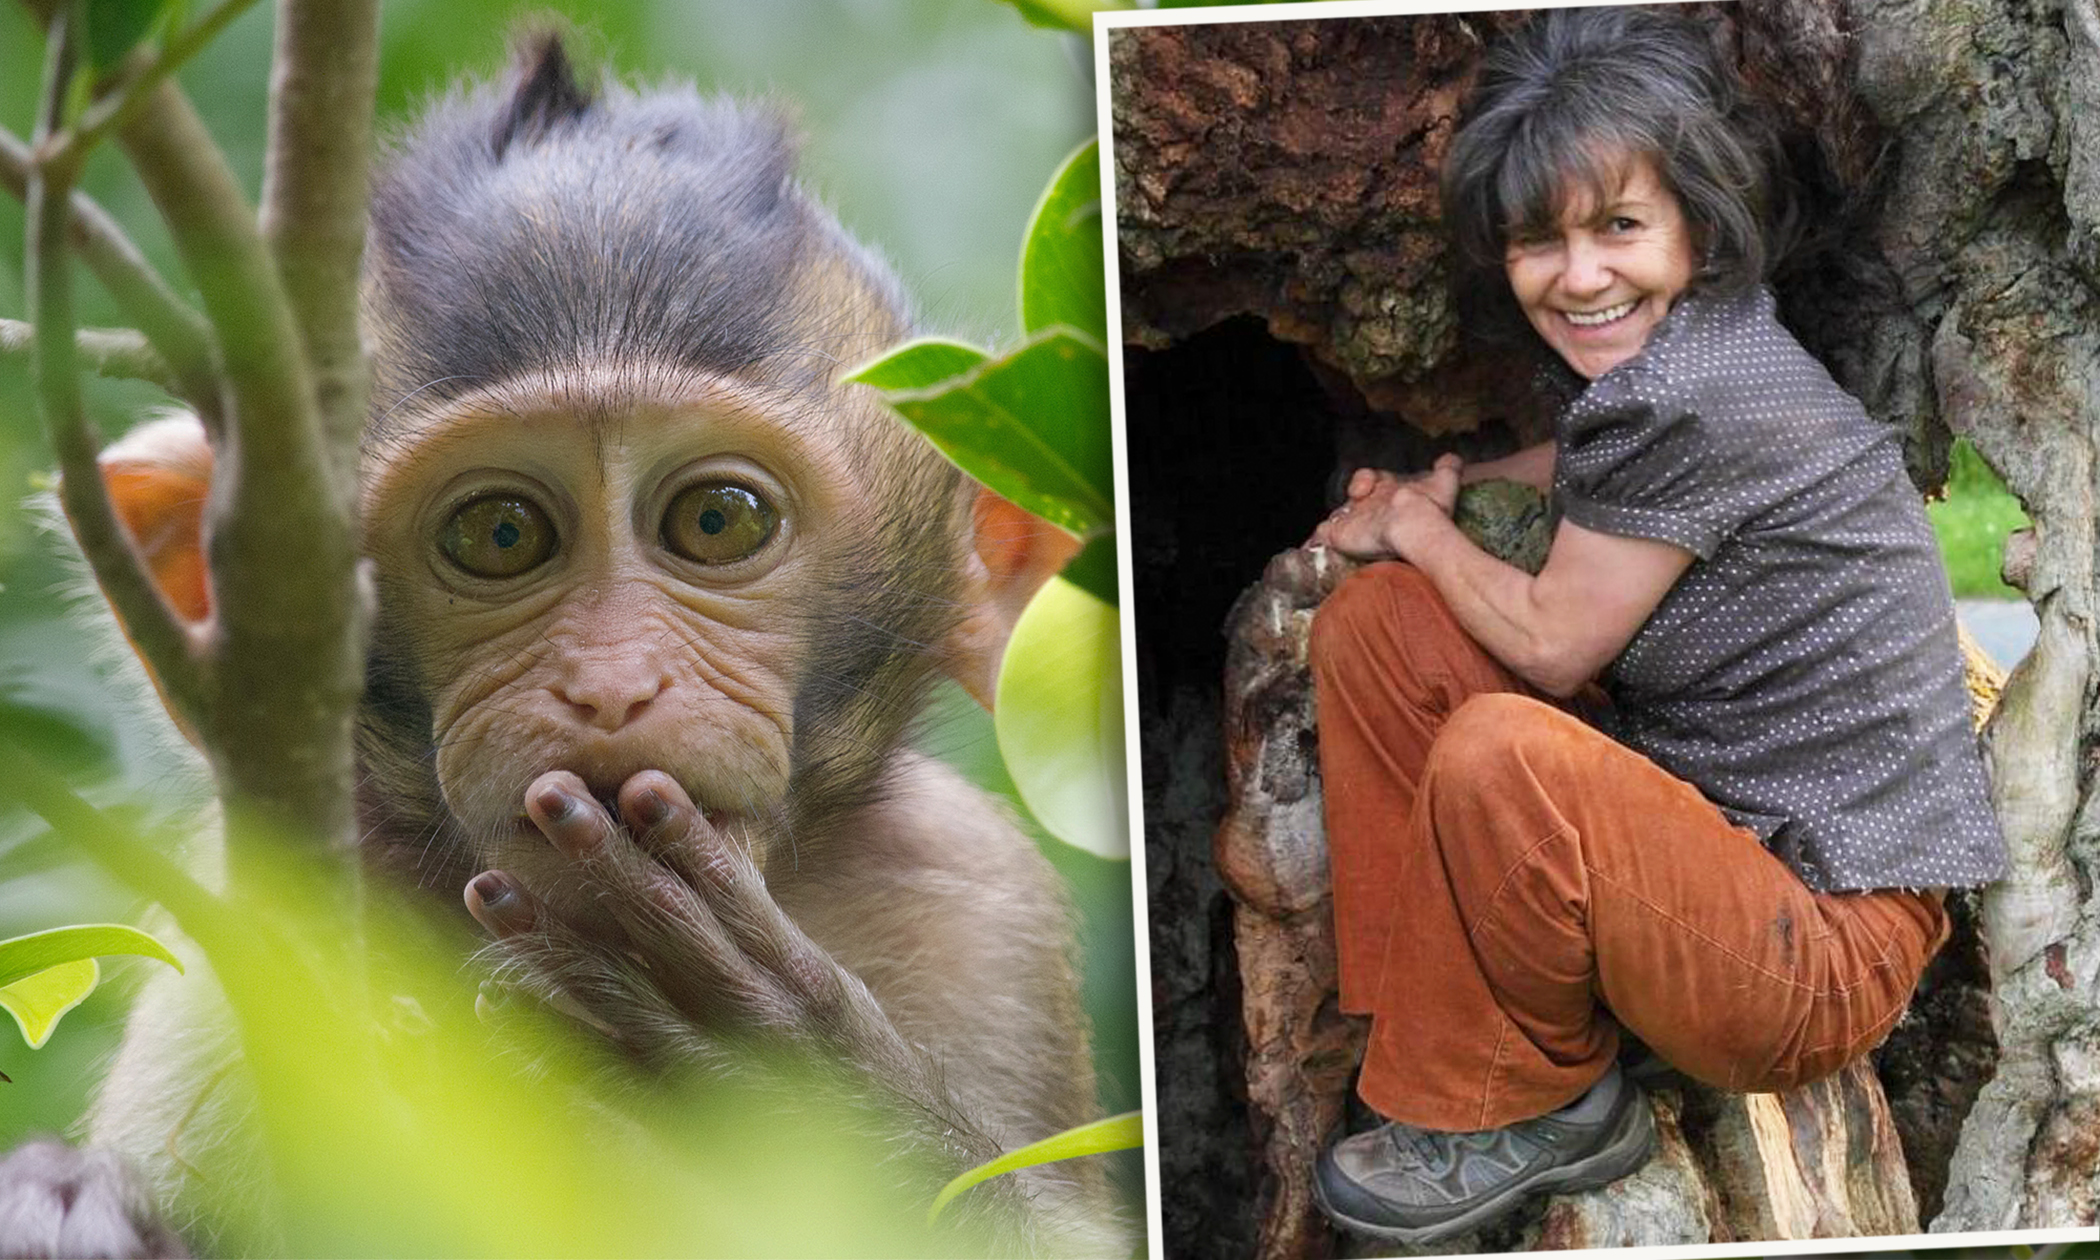 Woman Tells Her Story of Being Kidnapped at 4 and Growing Up With Monkeys in the Jungle